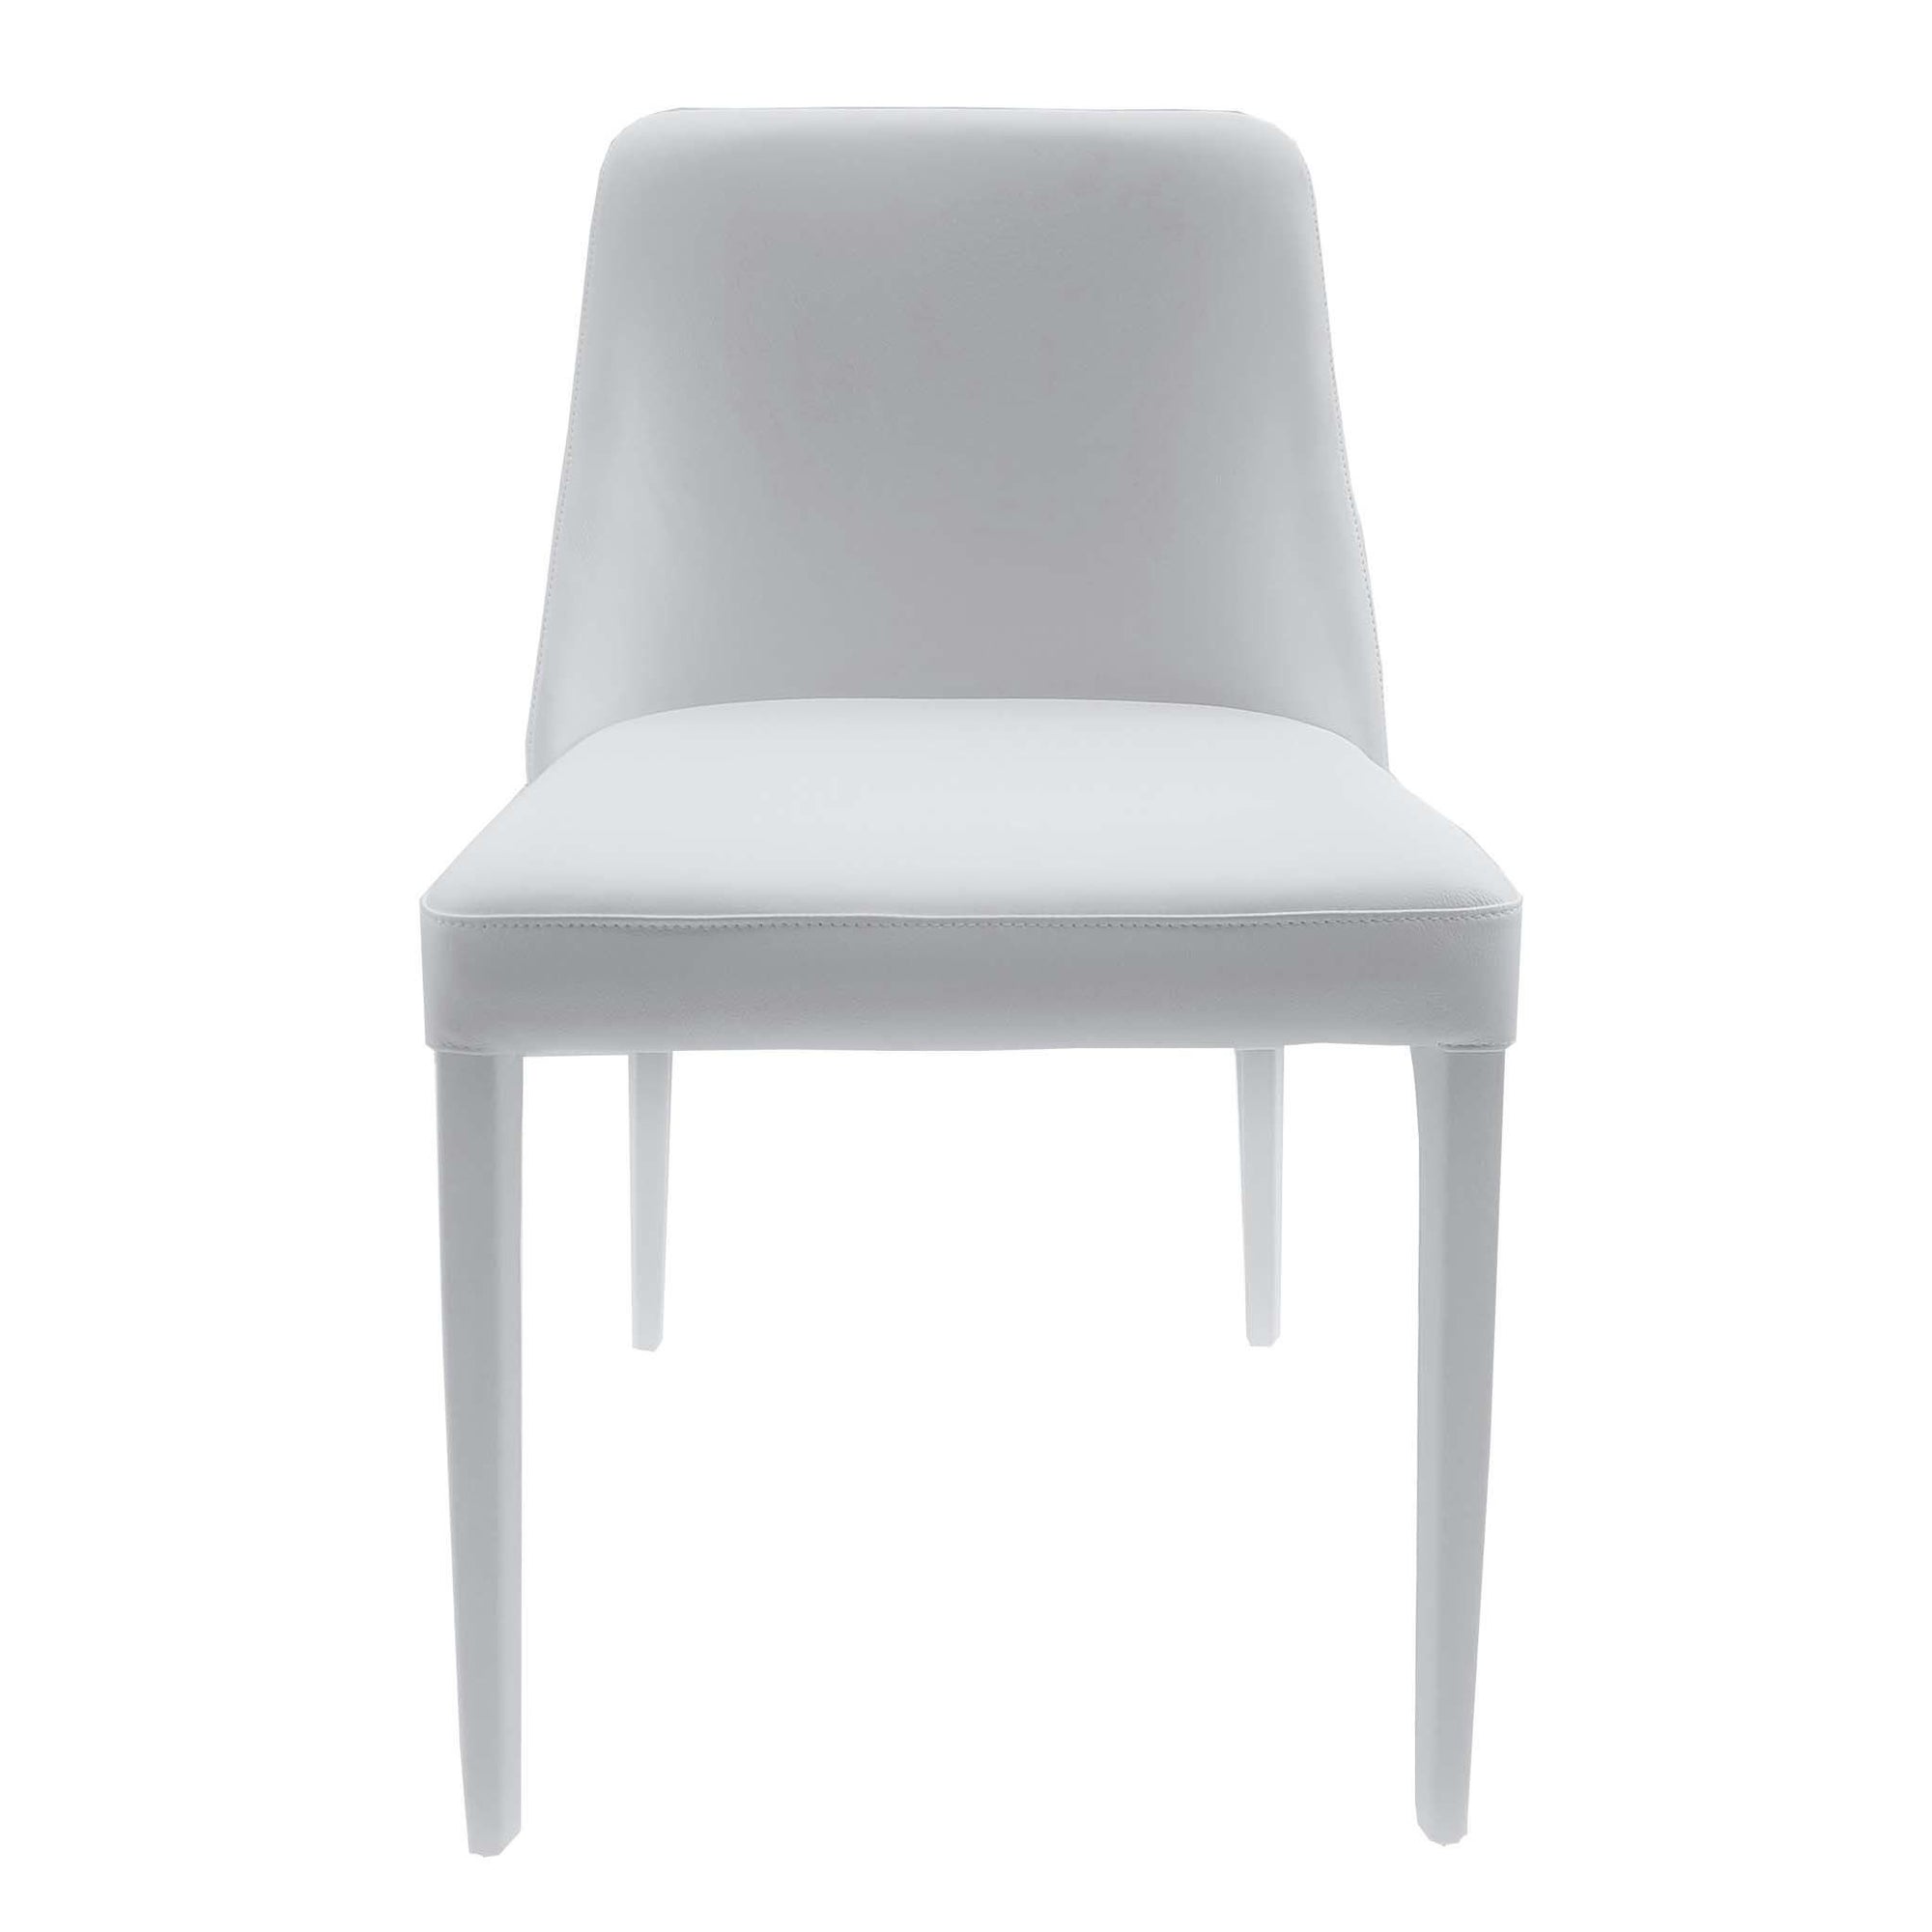 Bellini-Polly Chair-Dining Chairs-MODTEMPO